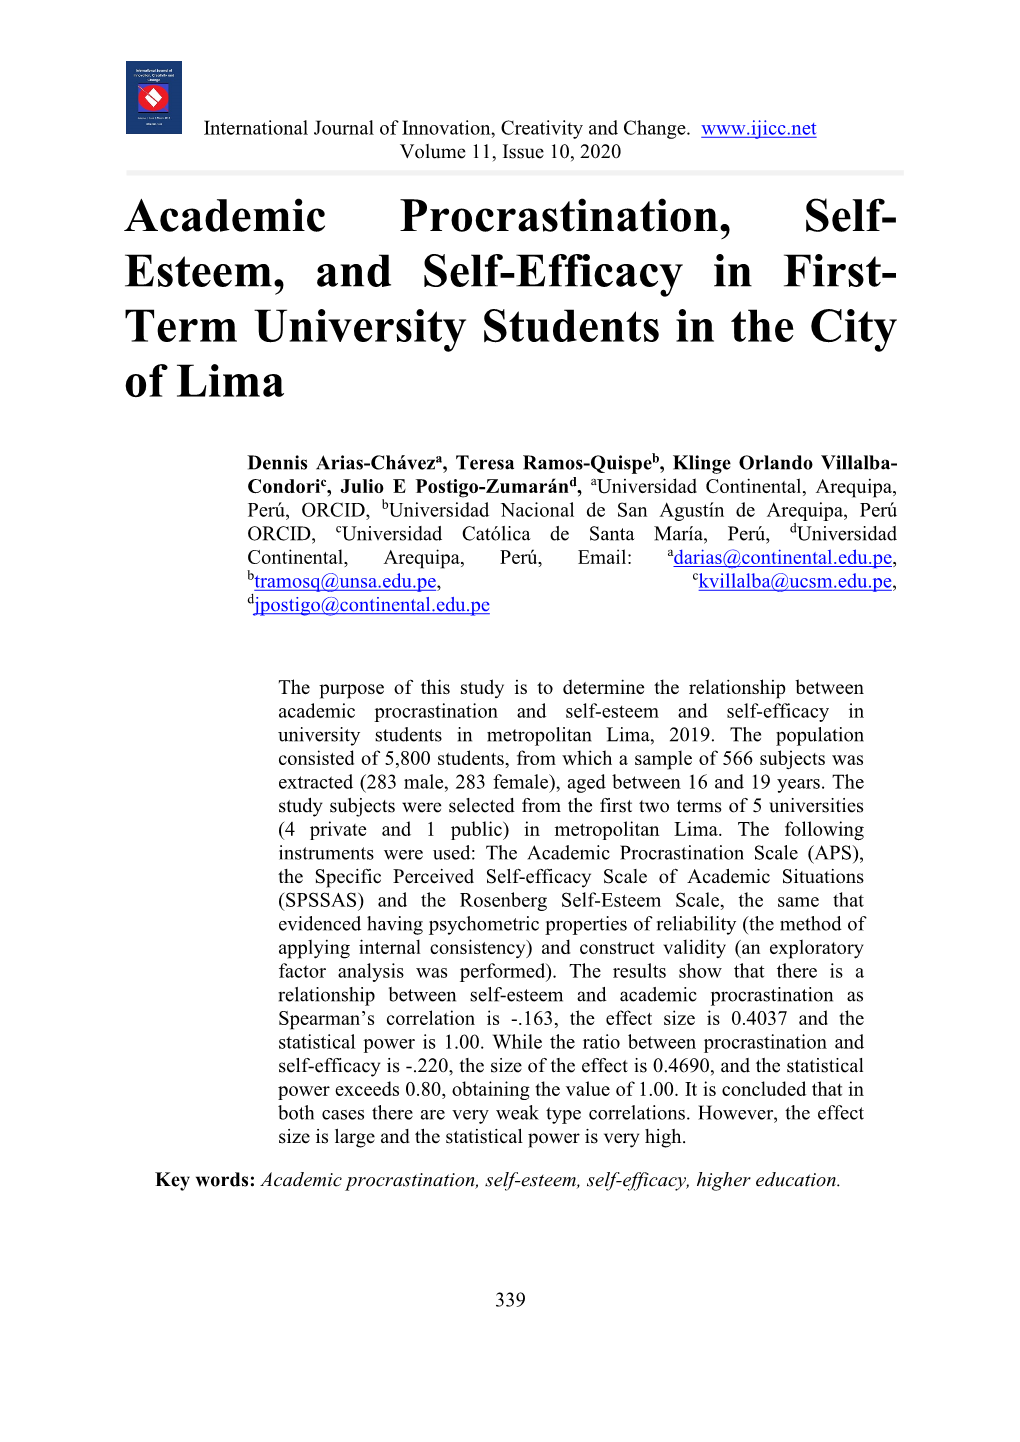 Academic Procrastination, Self- Esteem, and Self-Efficacy in First- Term University Students in the City of Lima